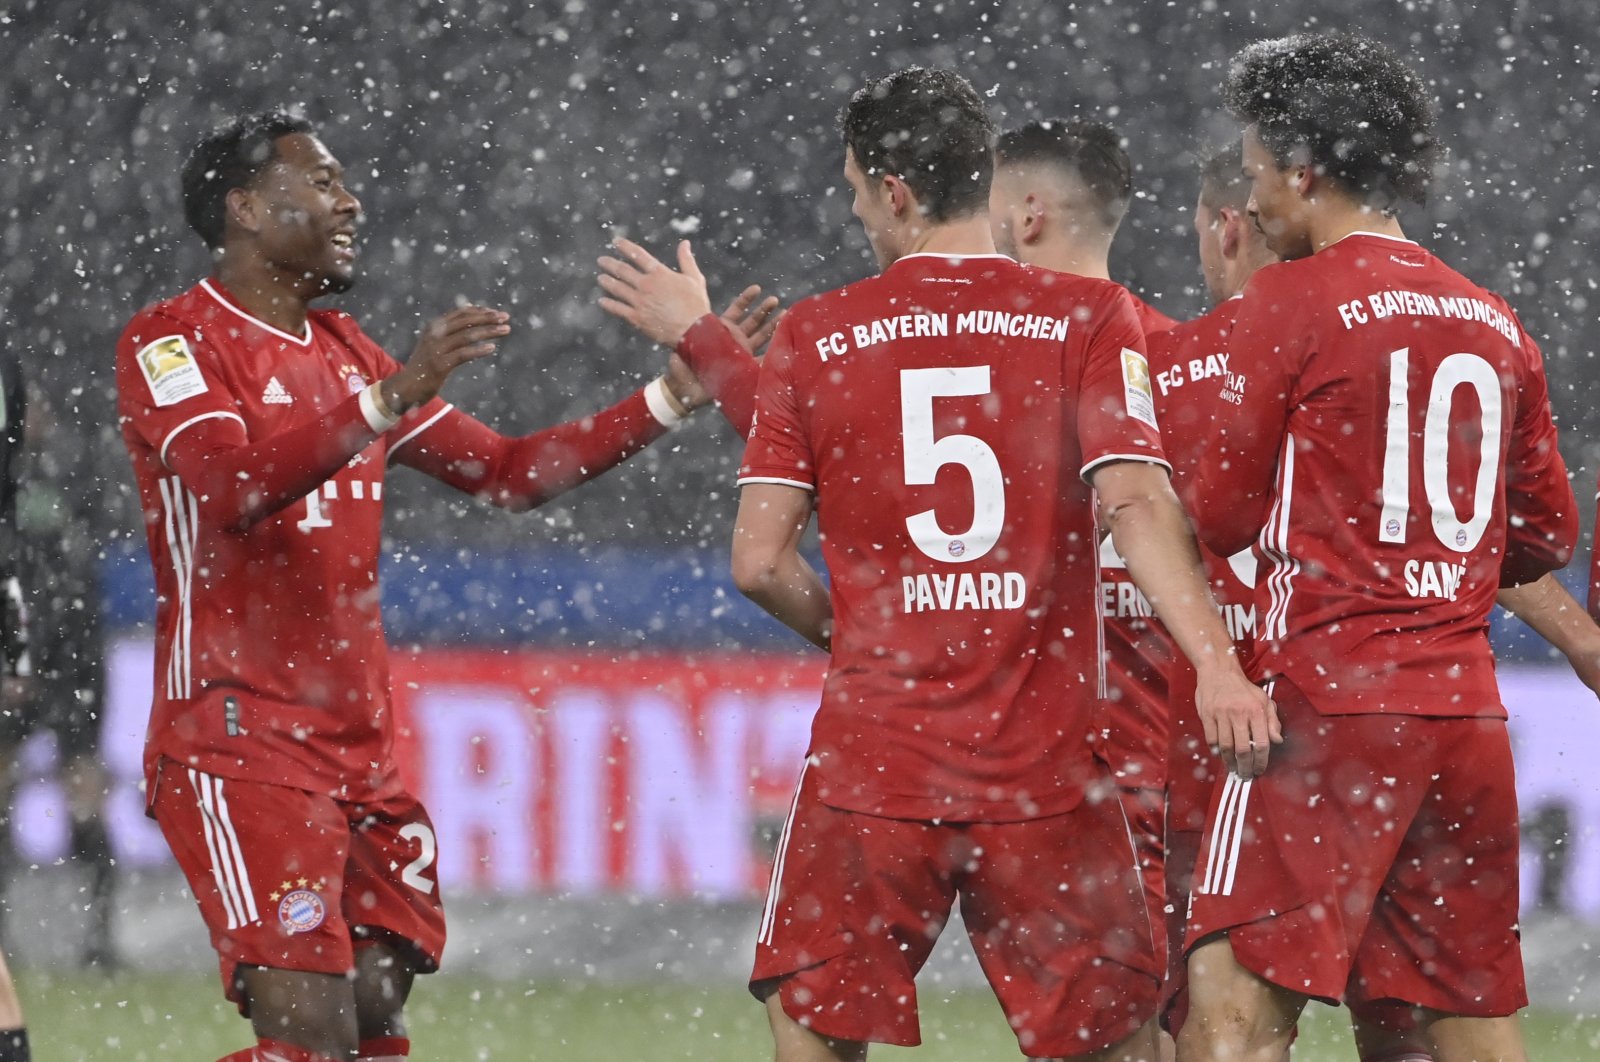 Bayern's Kingsley Coman, (L), celebrates after scoring his side's opening goal during the German Bundesliga soccer match between Hertha BSC Berlin and FC Bayern Munich in Berlin, Germany, Feb. 5, 2021. (Pool via AP)